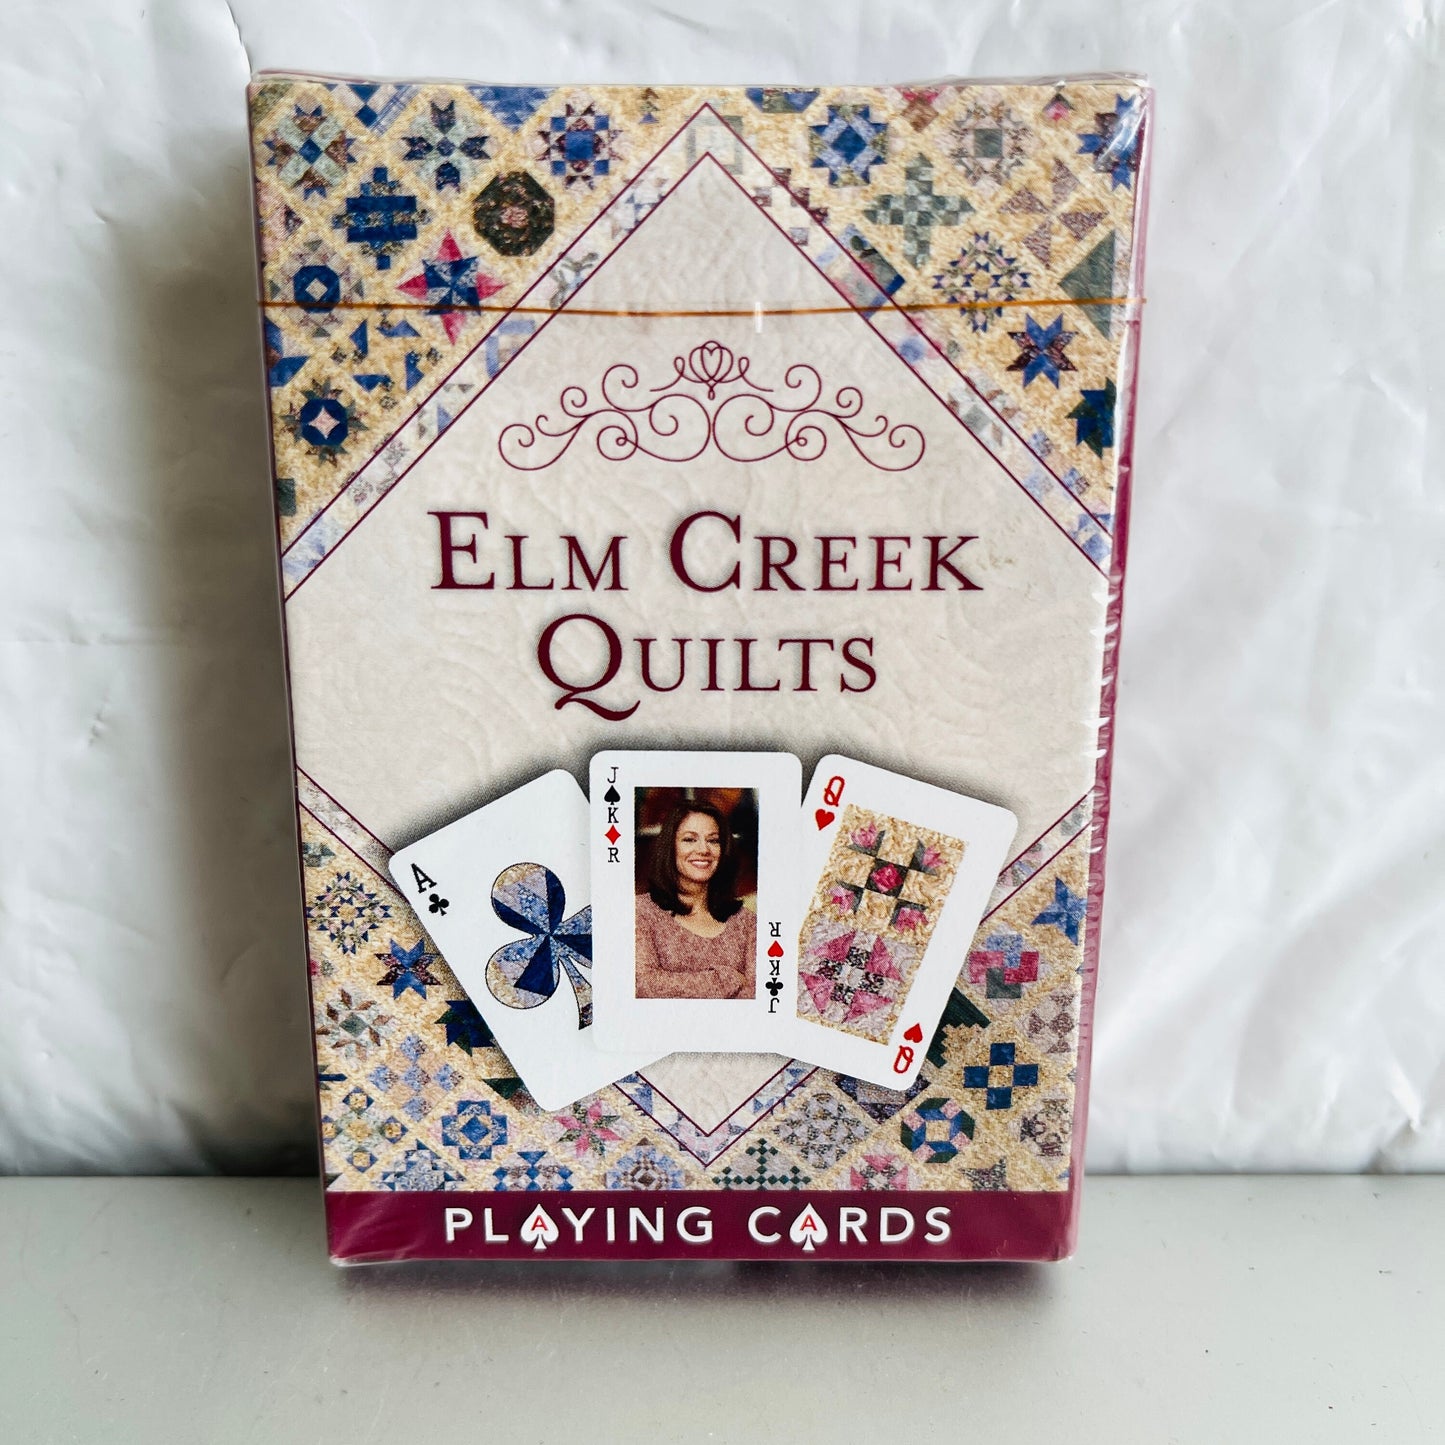 C & T Publications, Elm Creek Quilts, Playing Cards, Collectible Quilting Cards